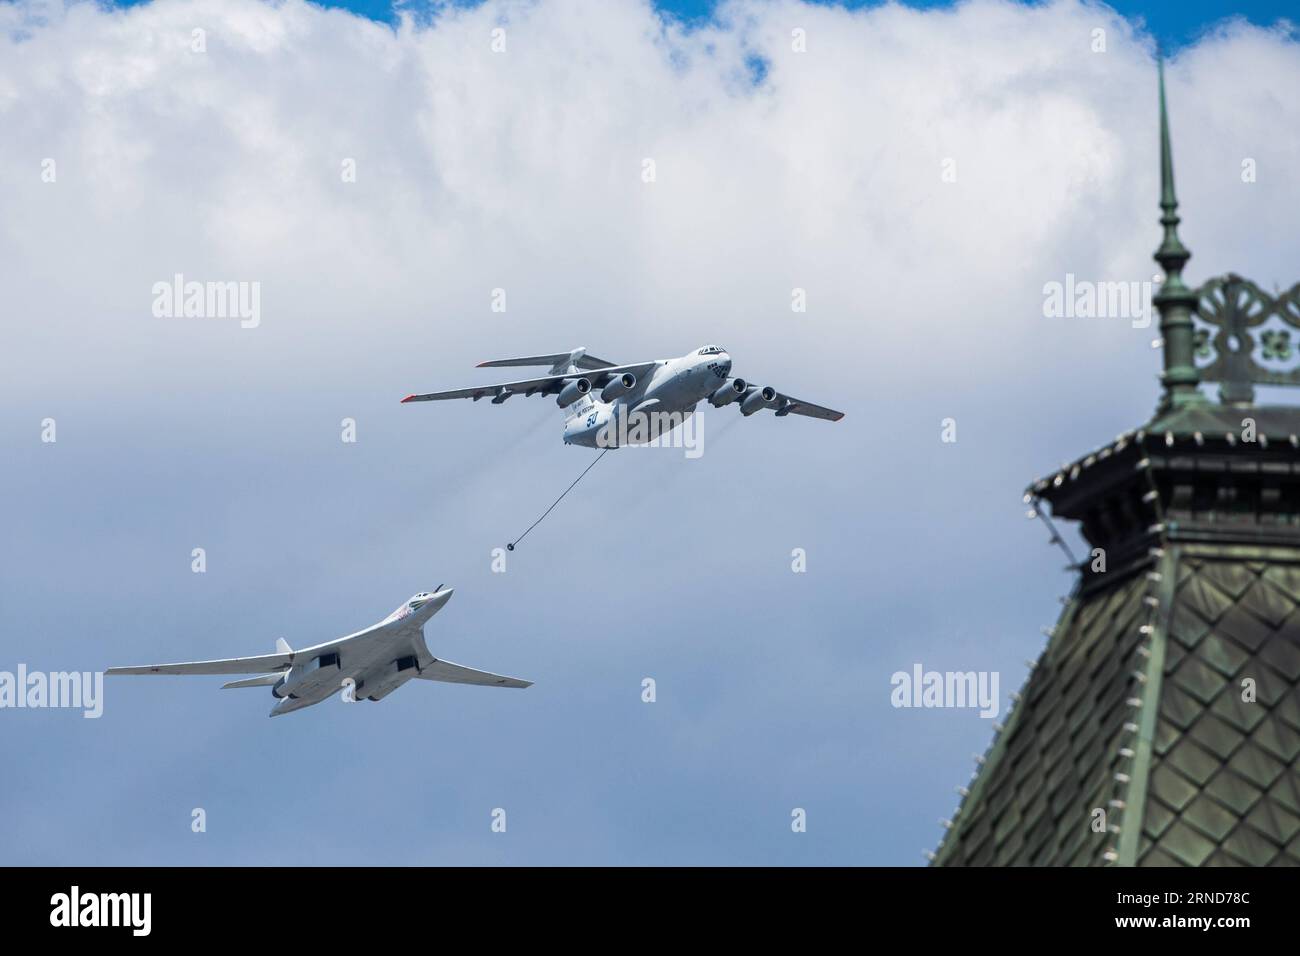 (160507) -- MOSCOW, May 7, 2016 -- An Il-78 air tanker and a Tu-160 bomber participate in the rehearsal for the Victory Day parade in Moscow, Russia, May 7, 2016. Russia will mark the 71st anniversary of the victory over Nazi Germany on May 9. ) (zjy) RUSSIA-MOSCOW-PARADE-REHEARSAL BaixXueqi PUBLICATIONxNOTxINxCHN   160507 Moscow May 7 2016 to Il 78 Air Tankers and a TU 160 Bombers participate in The rehearsal for The Victory Day Parade in Moscow Russia May 7 2016 Russia will Mark The 71st Anniversary of The Victory Over Nazi Germany ON May 9 zjy Russia Moscow Parade rehearsal BaixXueqi PUBLIC Stock Photo